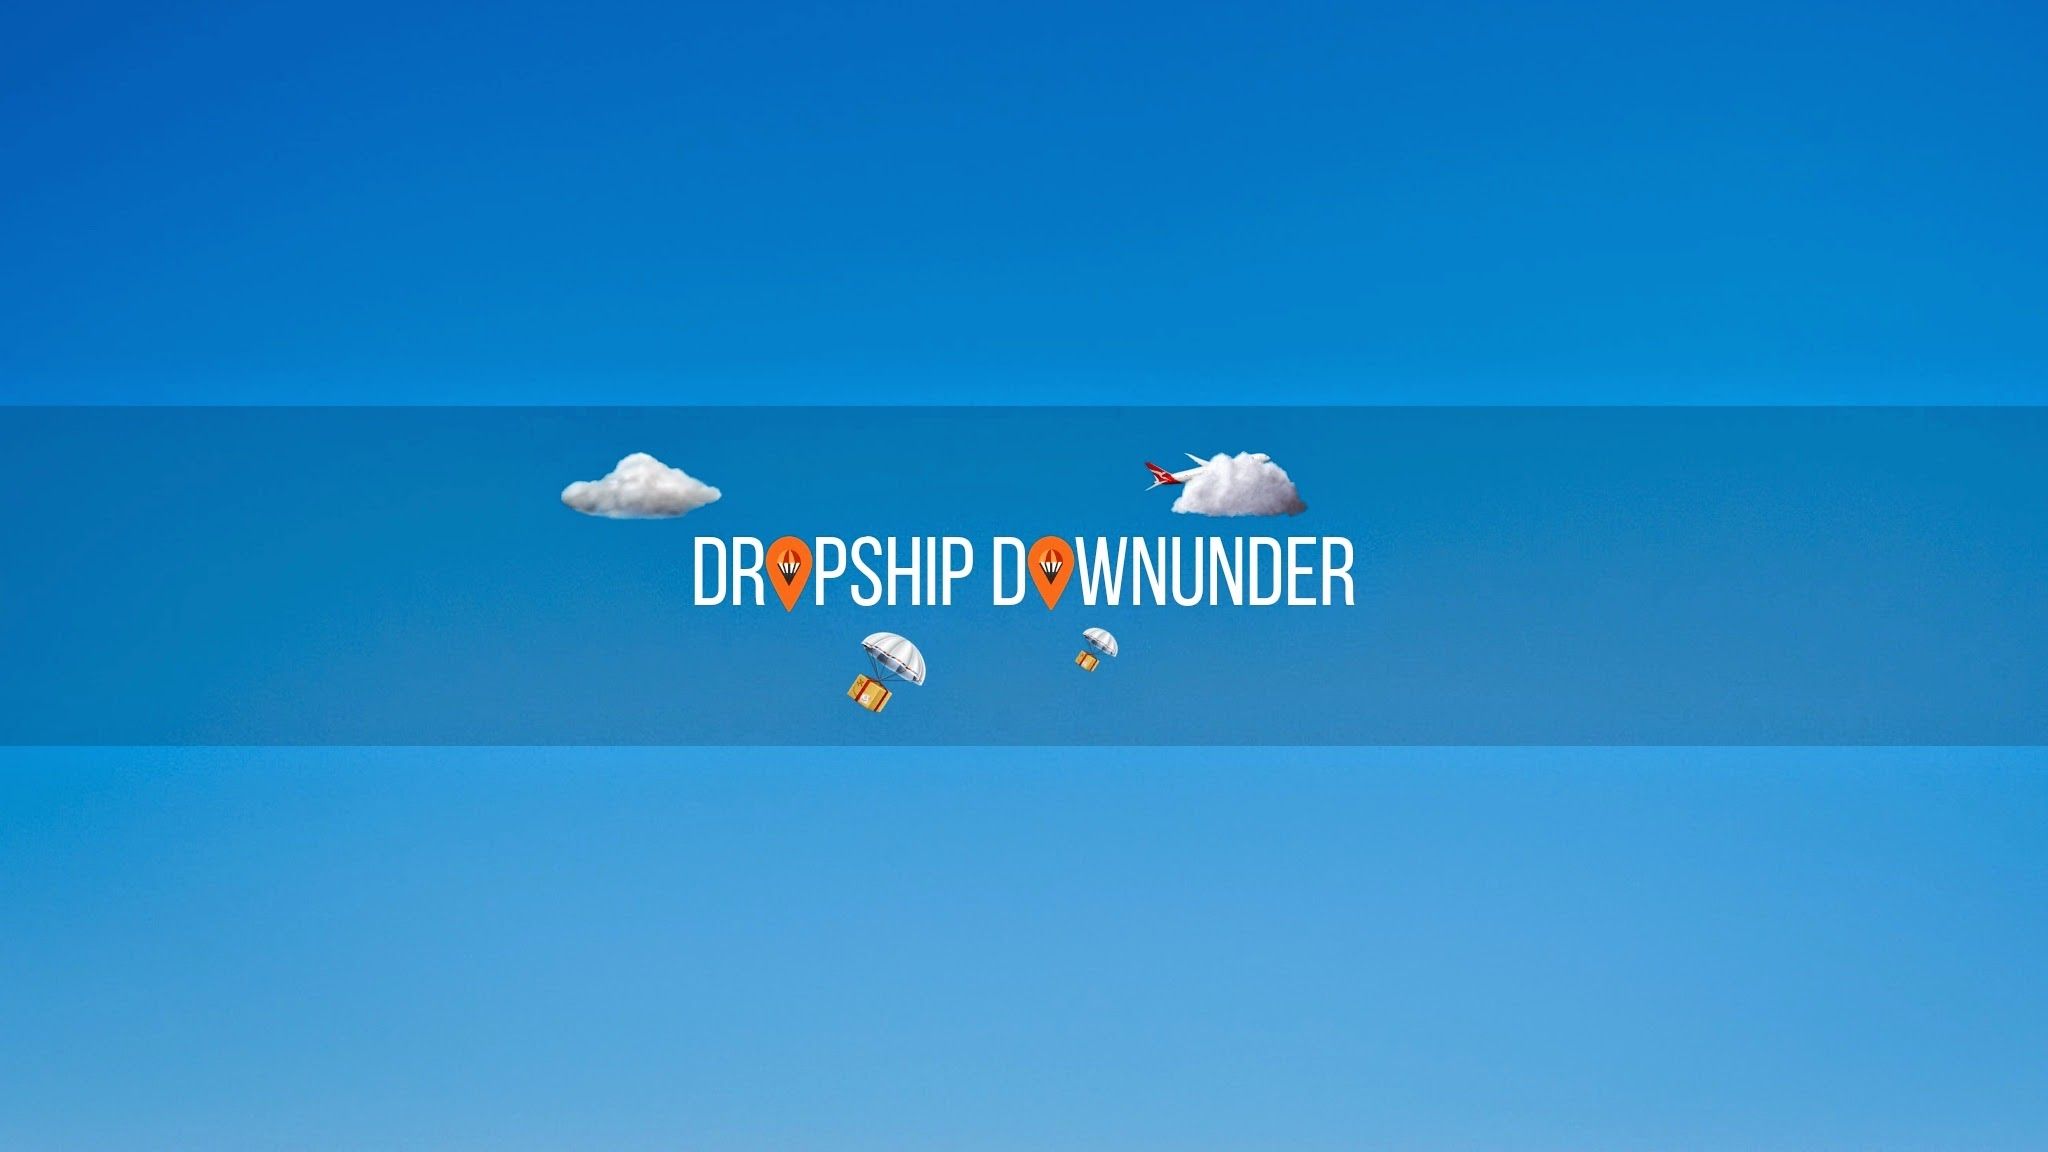 Dropship Downunder- eCommerce Youtube Channels 2021